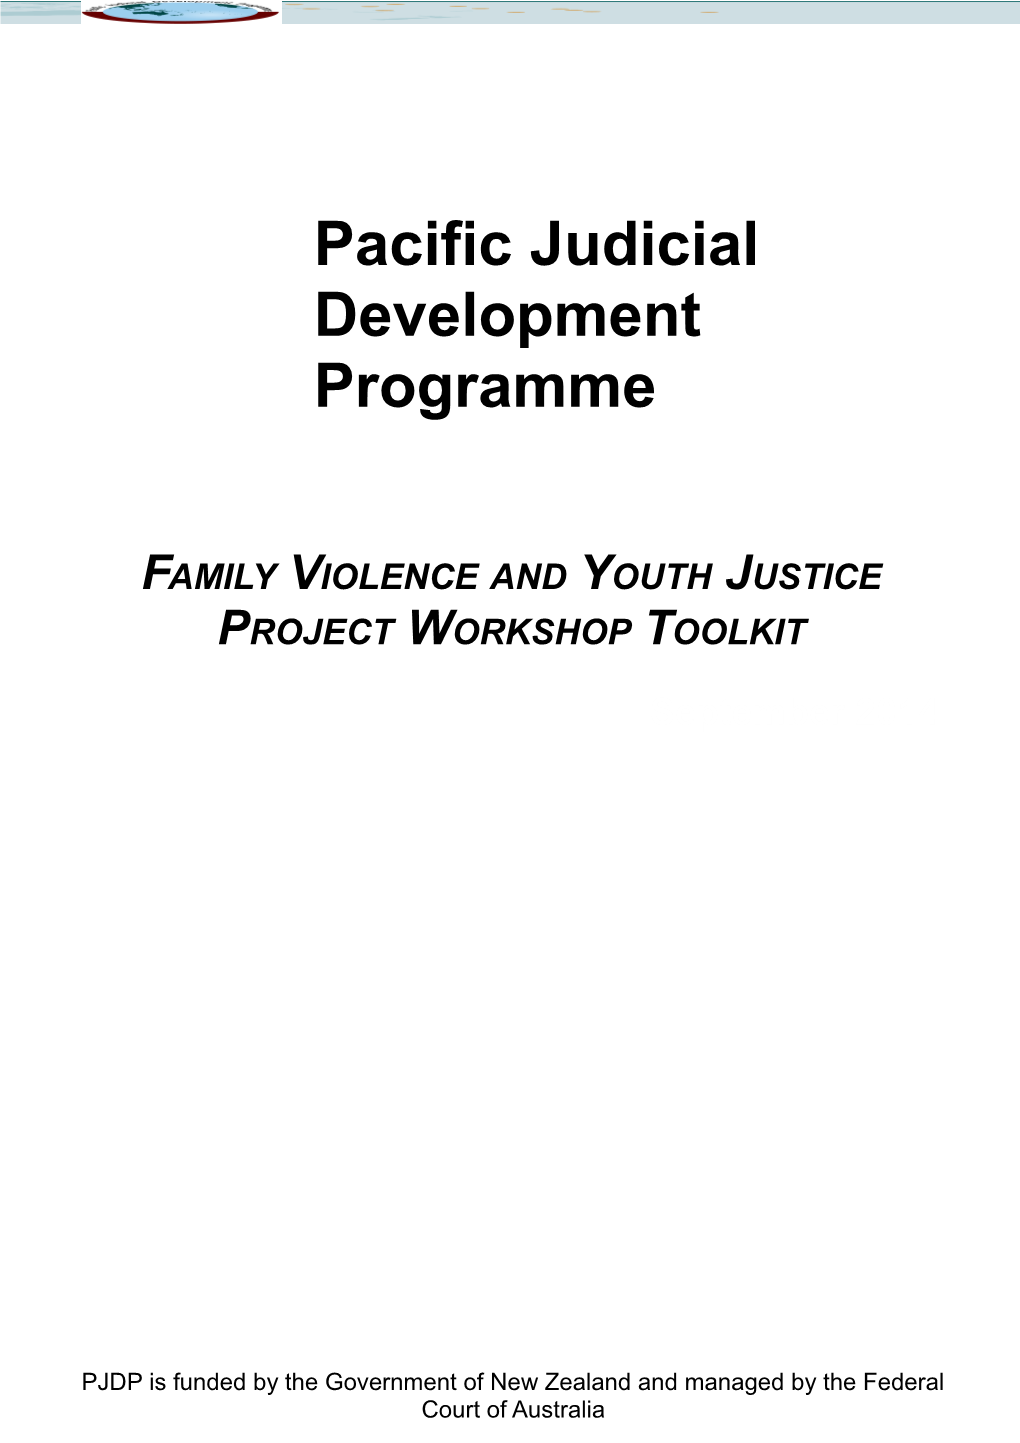 Family Violence and Youth Justice Project Workshop Toolkit